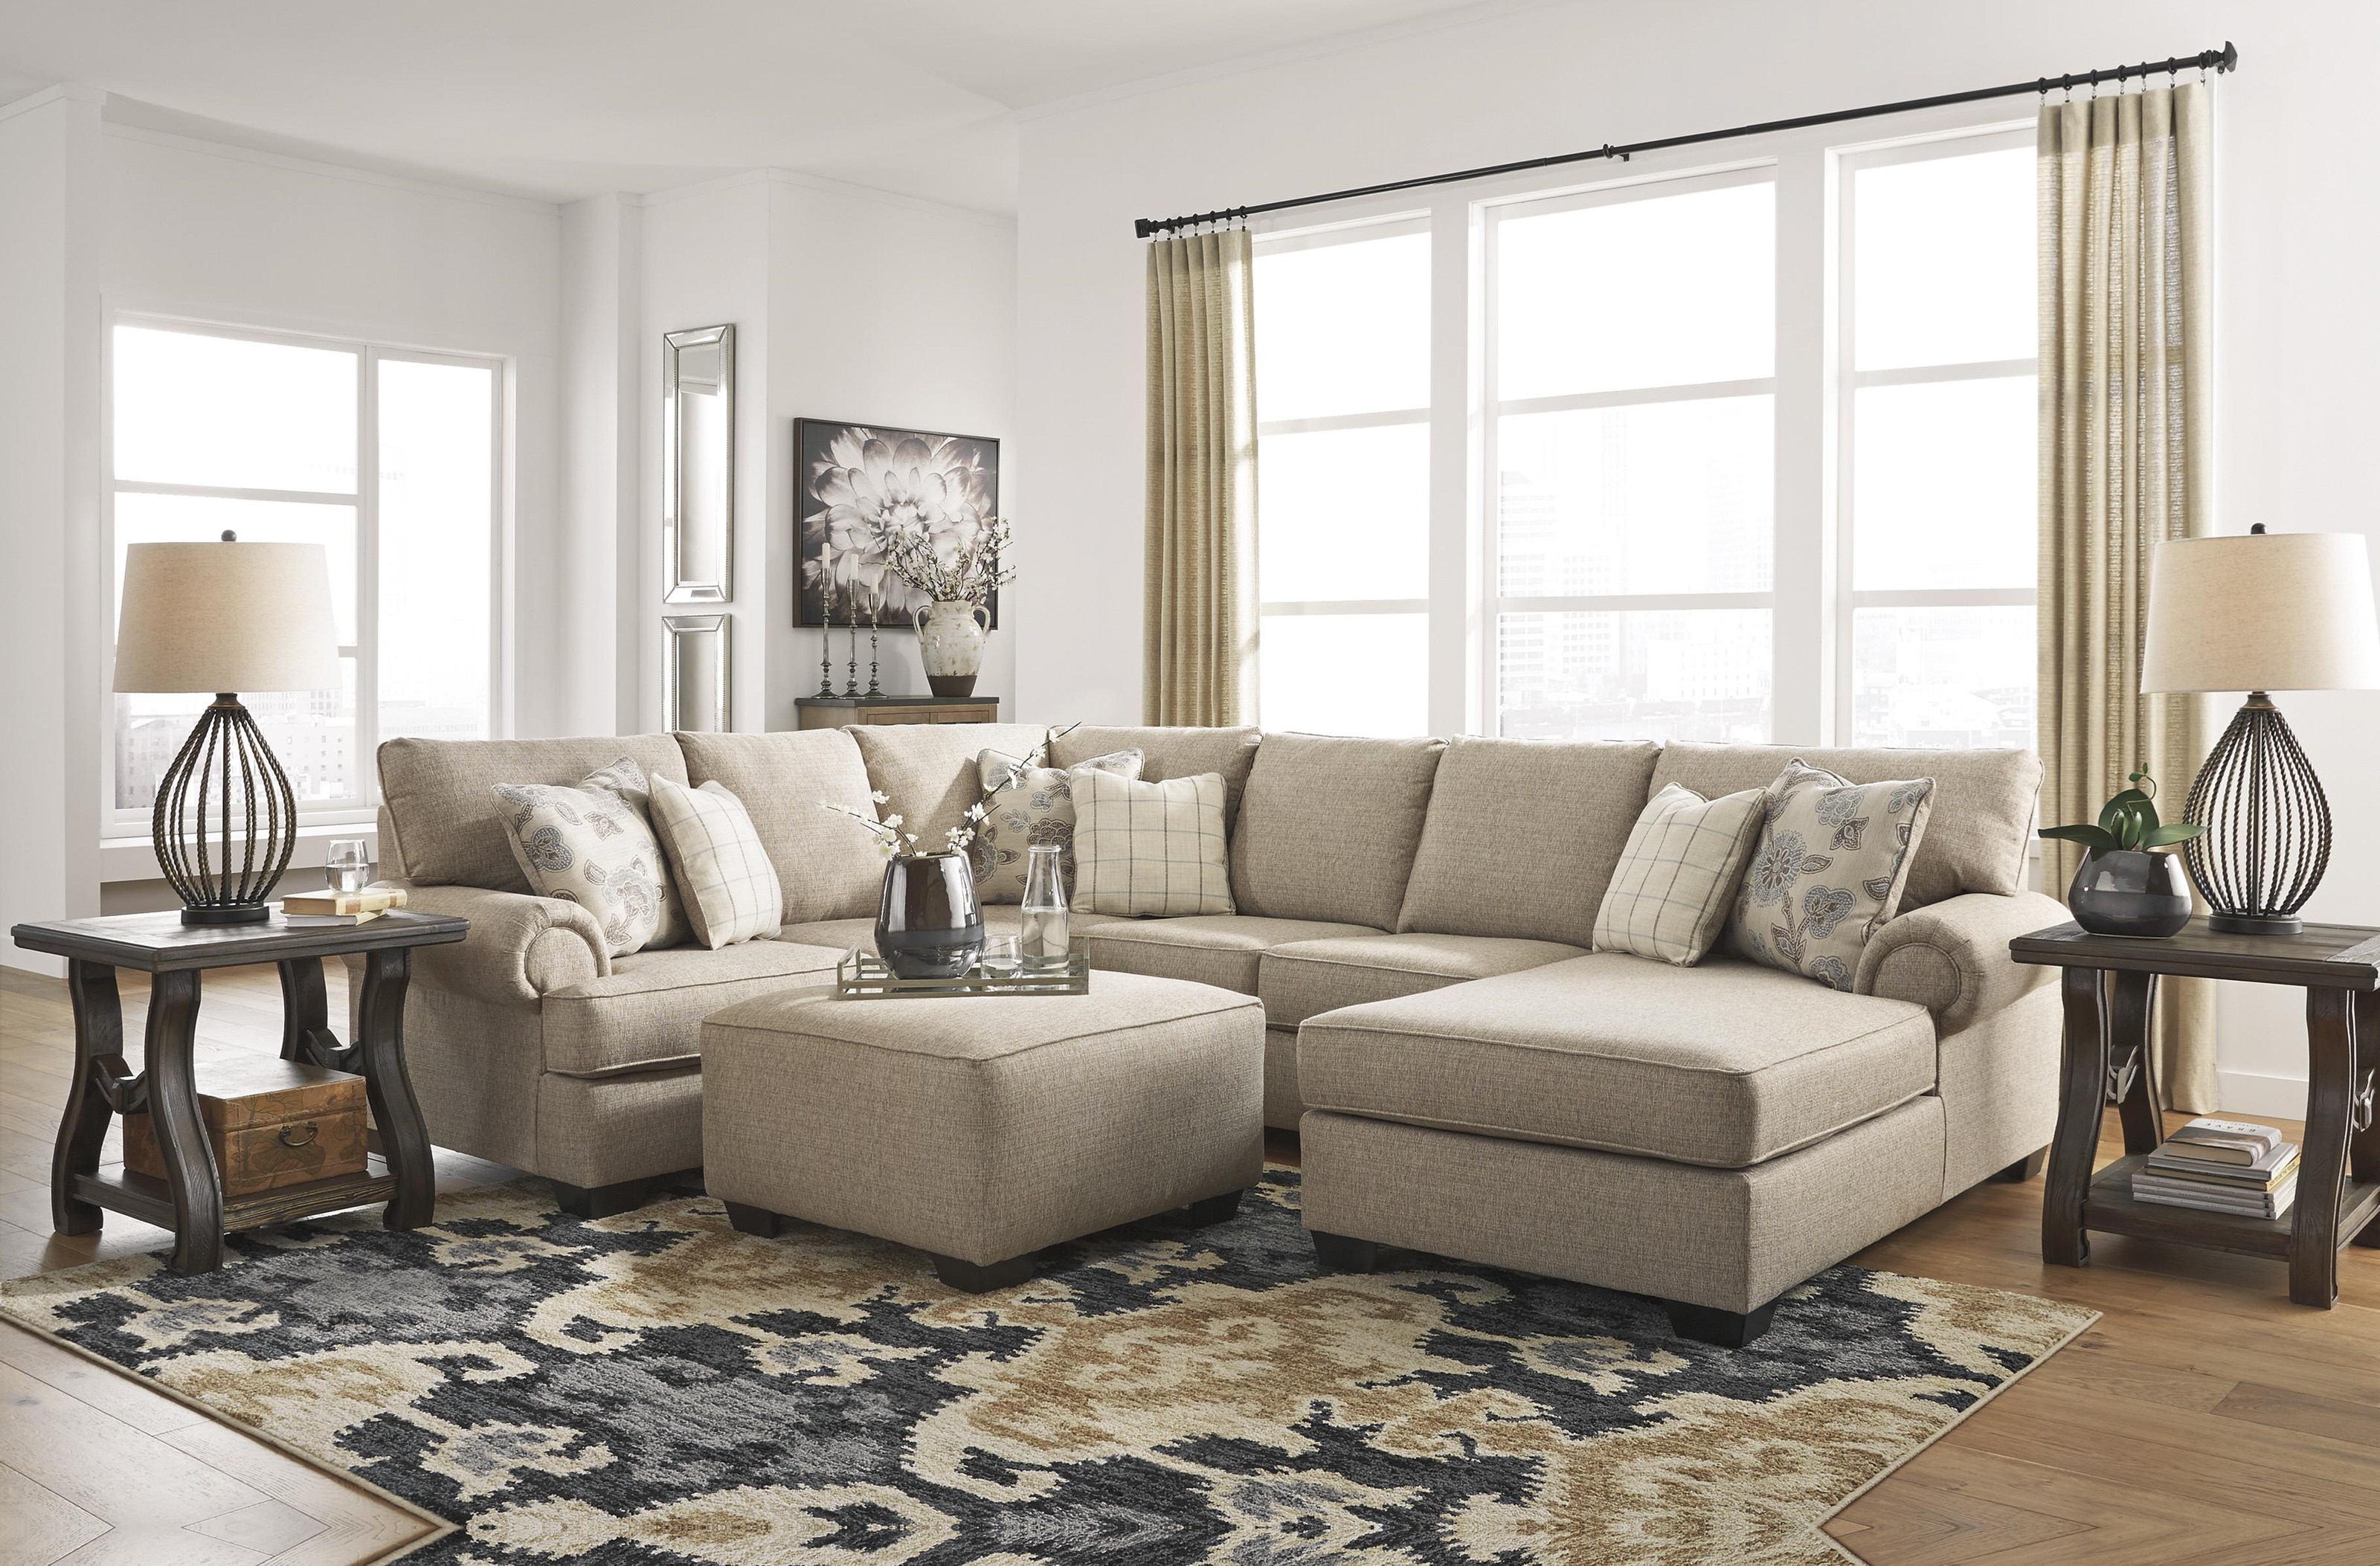 3 Piece Sectional Chaise Sofa and Ottoman Set